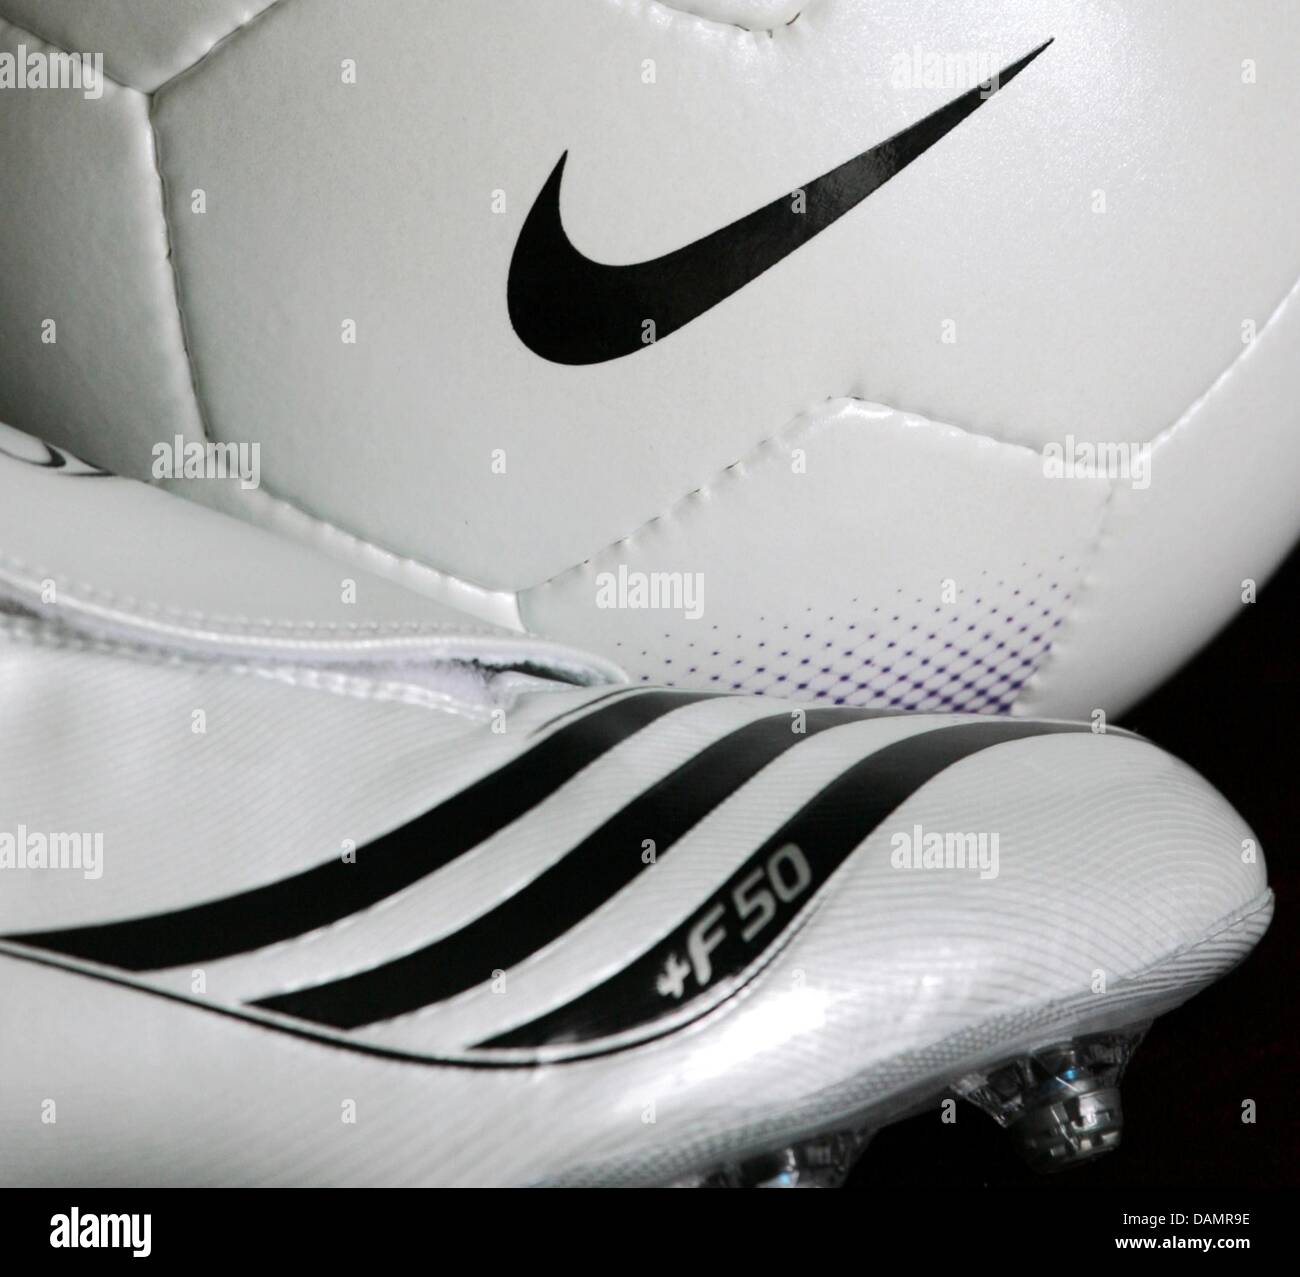 Grumpy Susteen Drama dpa file) - A file picture dated 22 March 2007 of an adidas soccer shoe  standing next to a Nike ball in Duesseldorf, Germany. In their race for the  World's number one